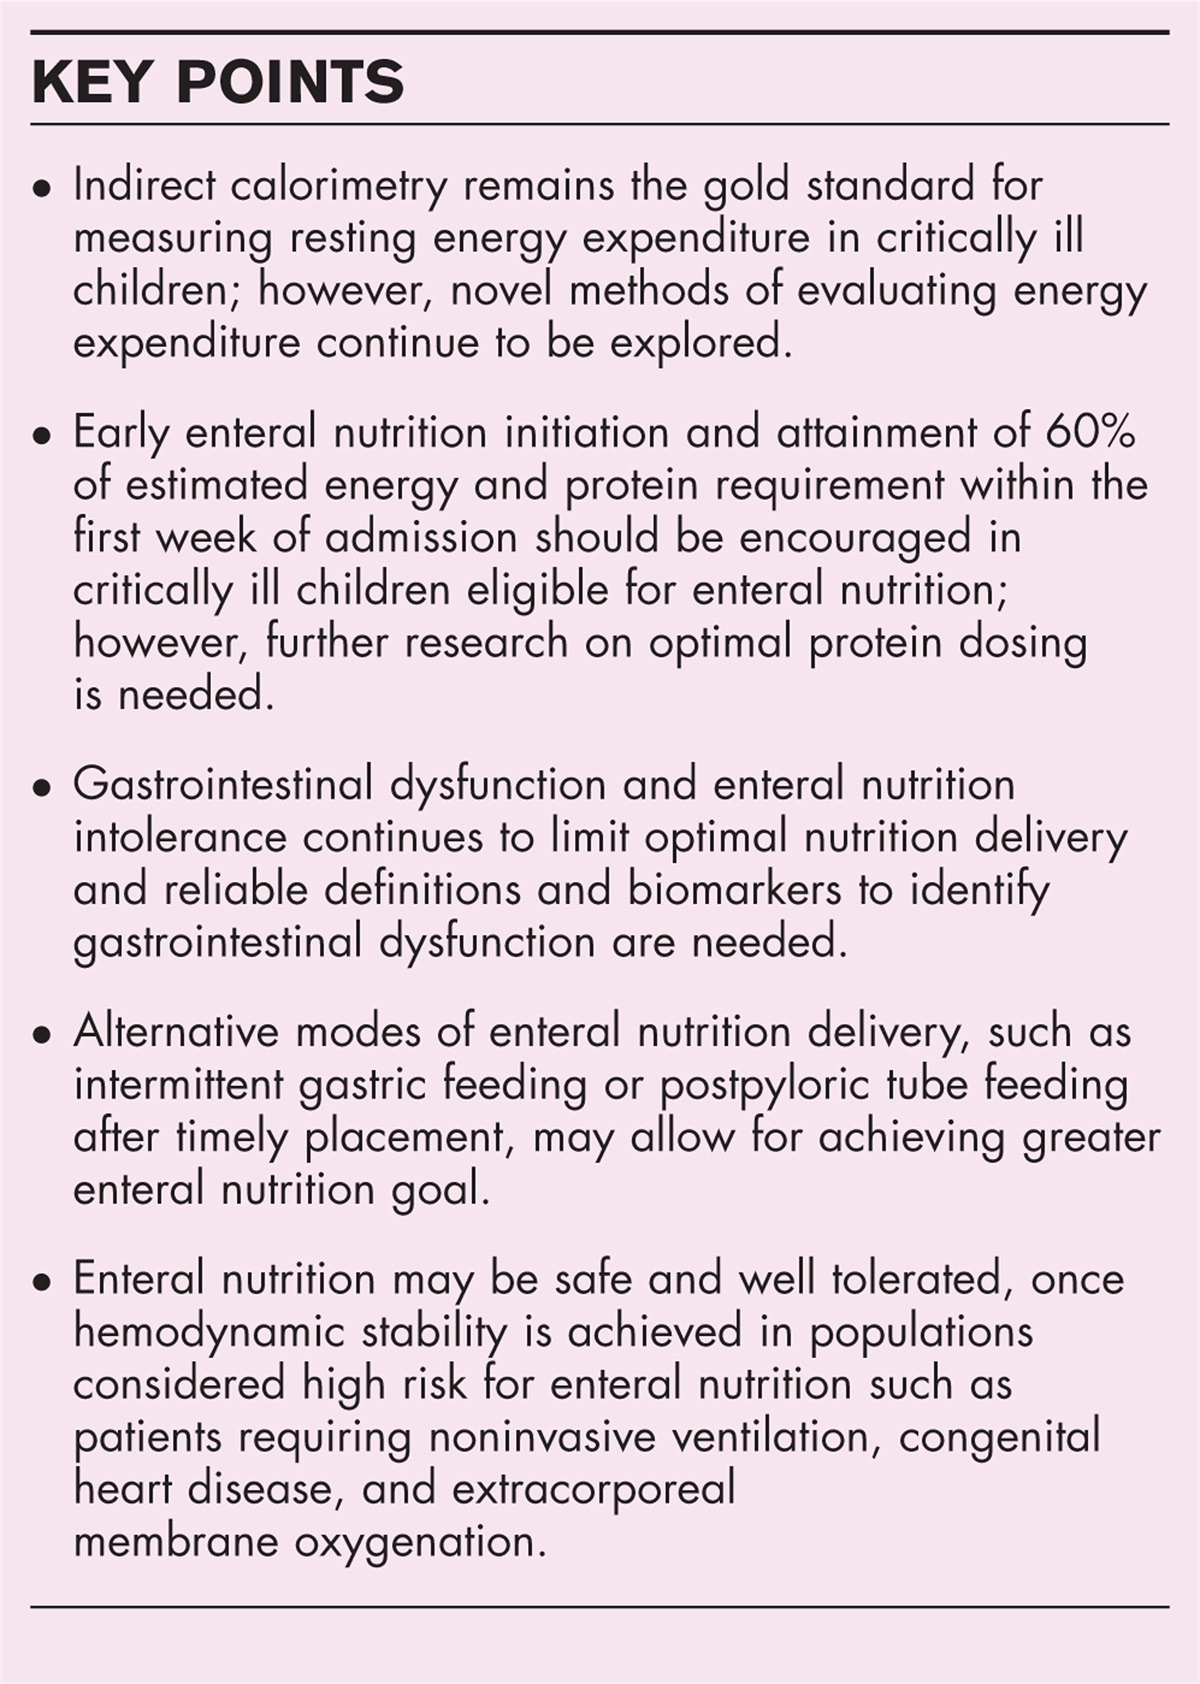 Challenges and advances in nutrition for the critically ill child